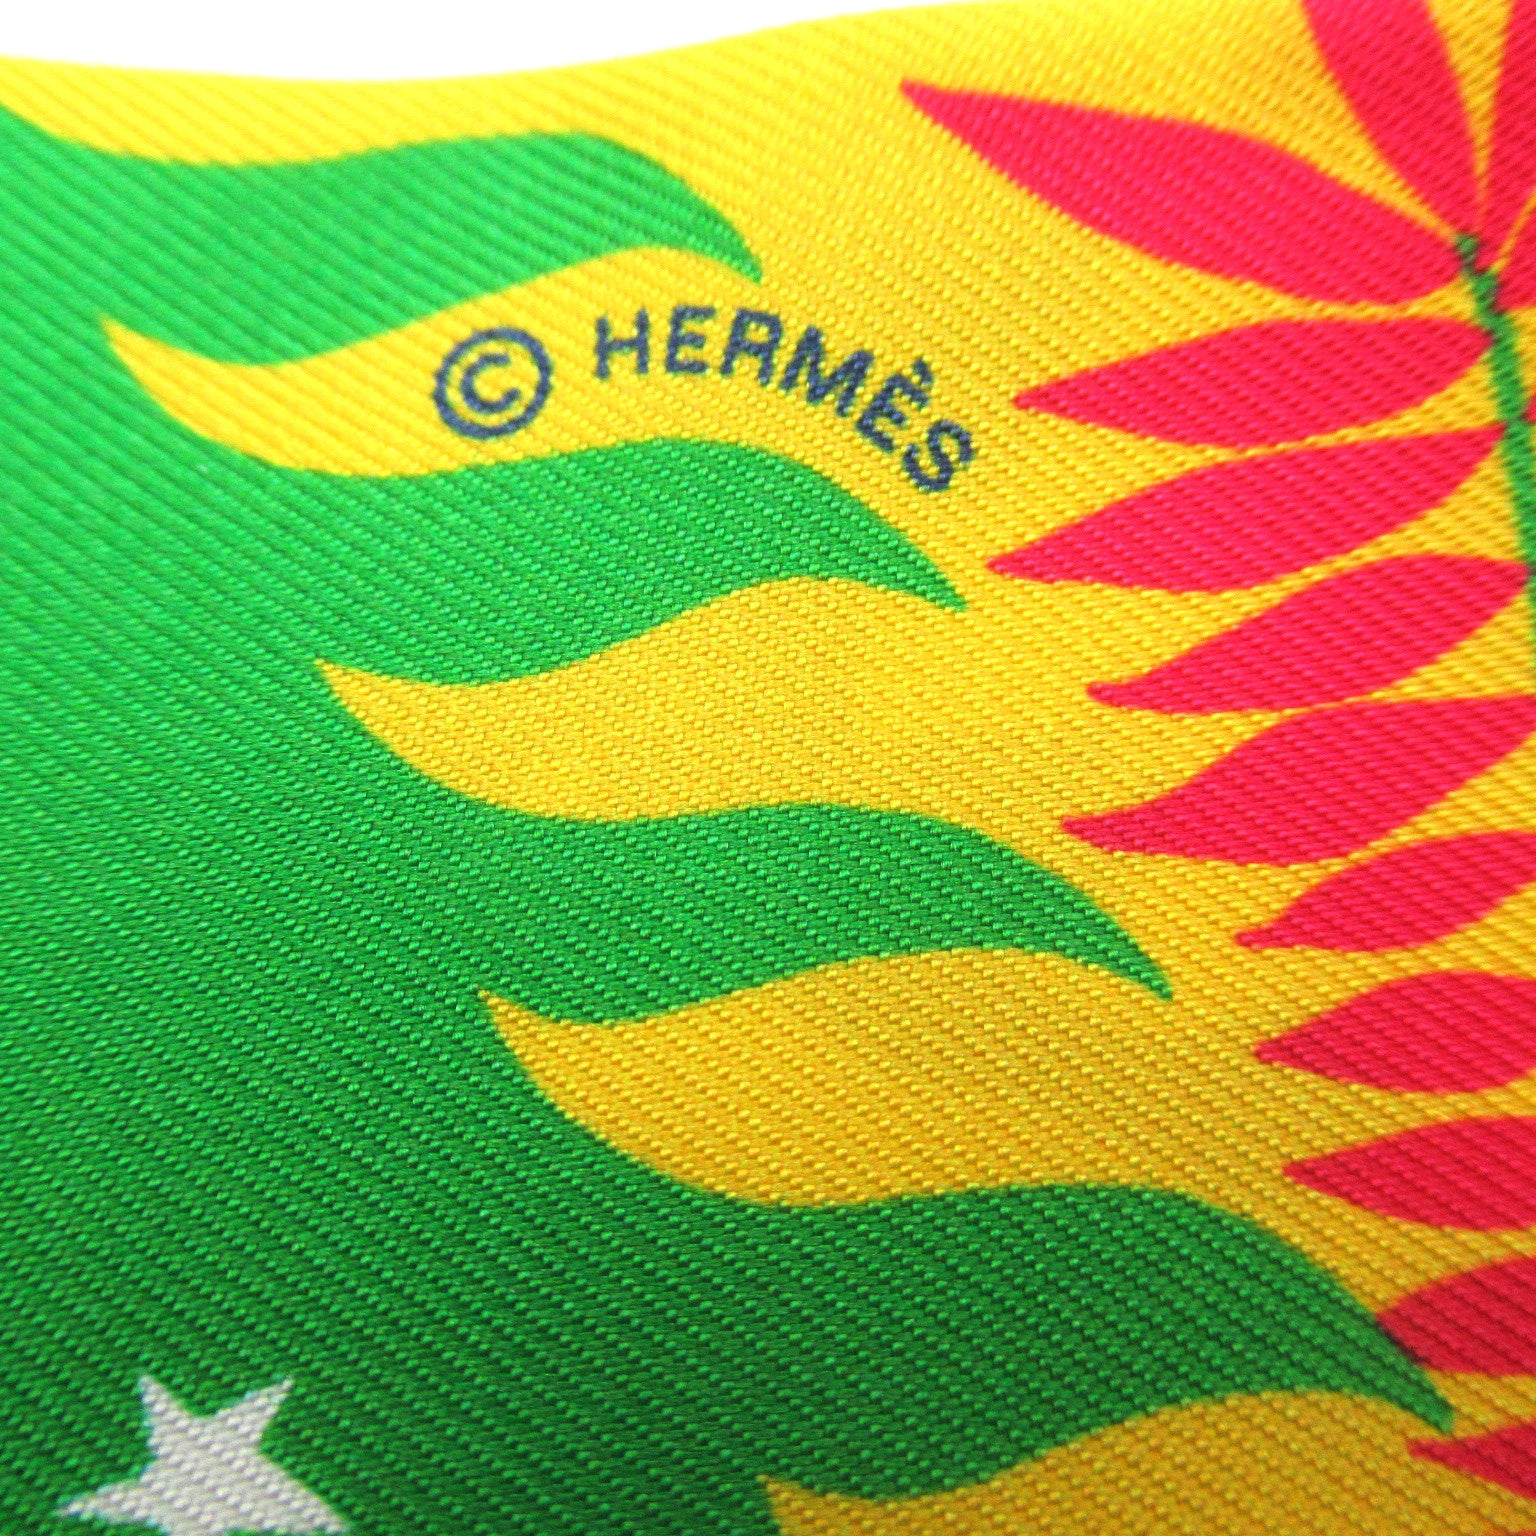 Hermes Hermes  Clothes  Yellow